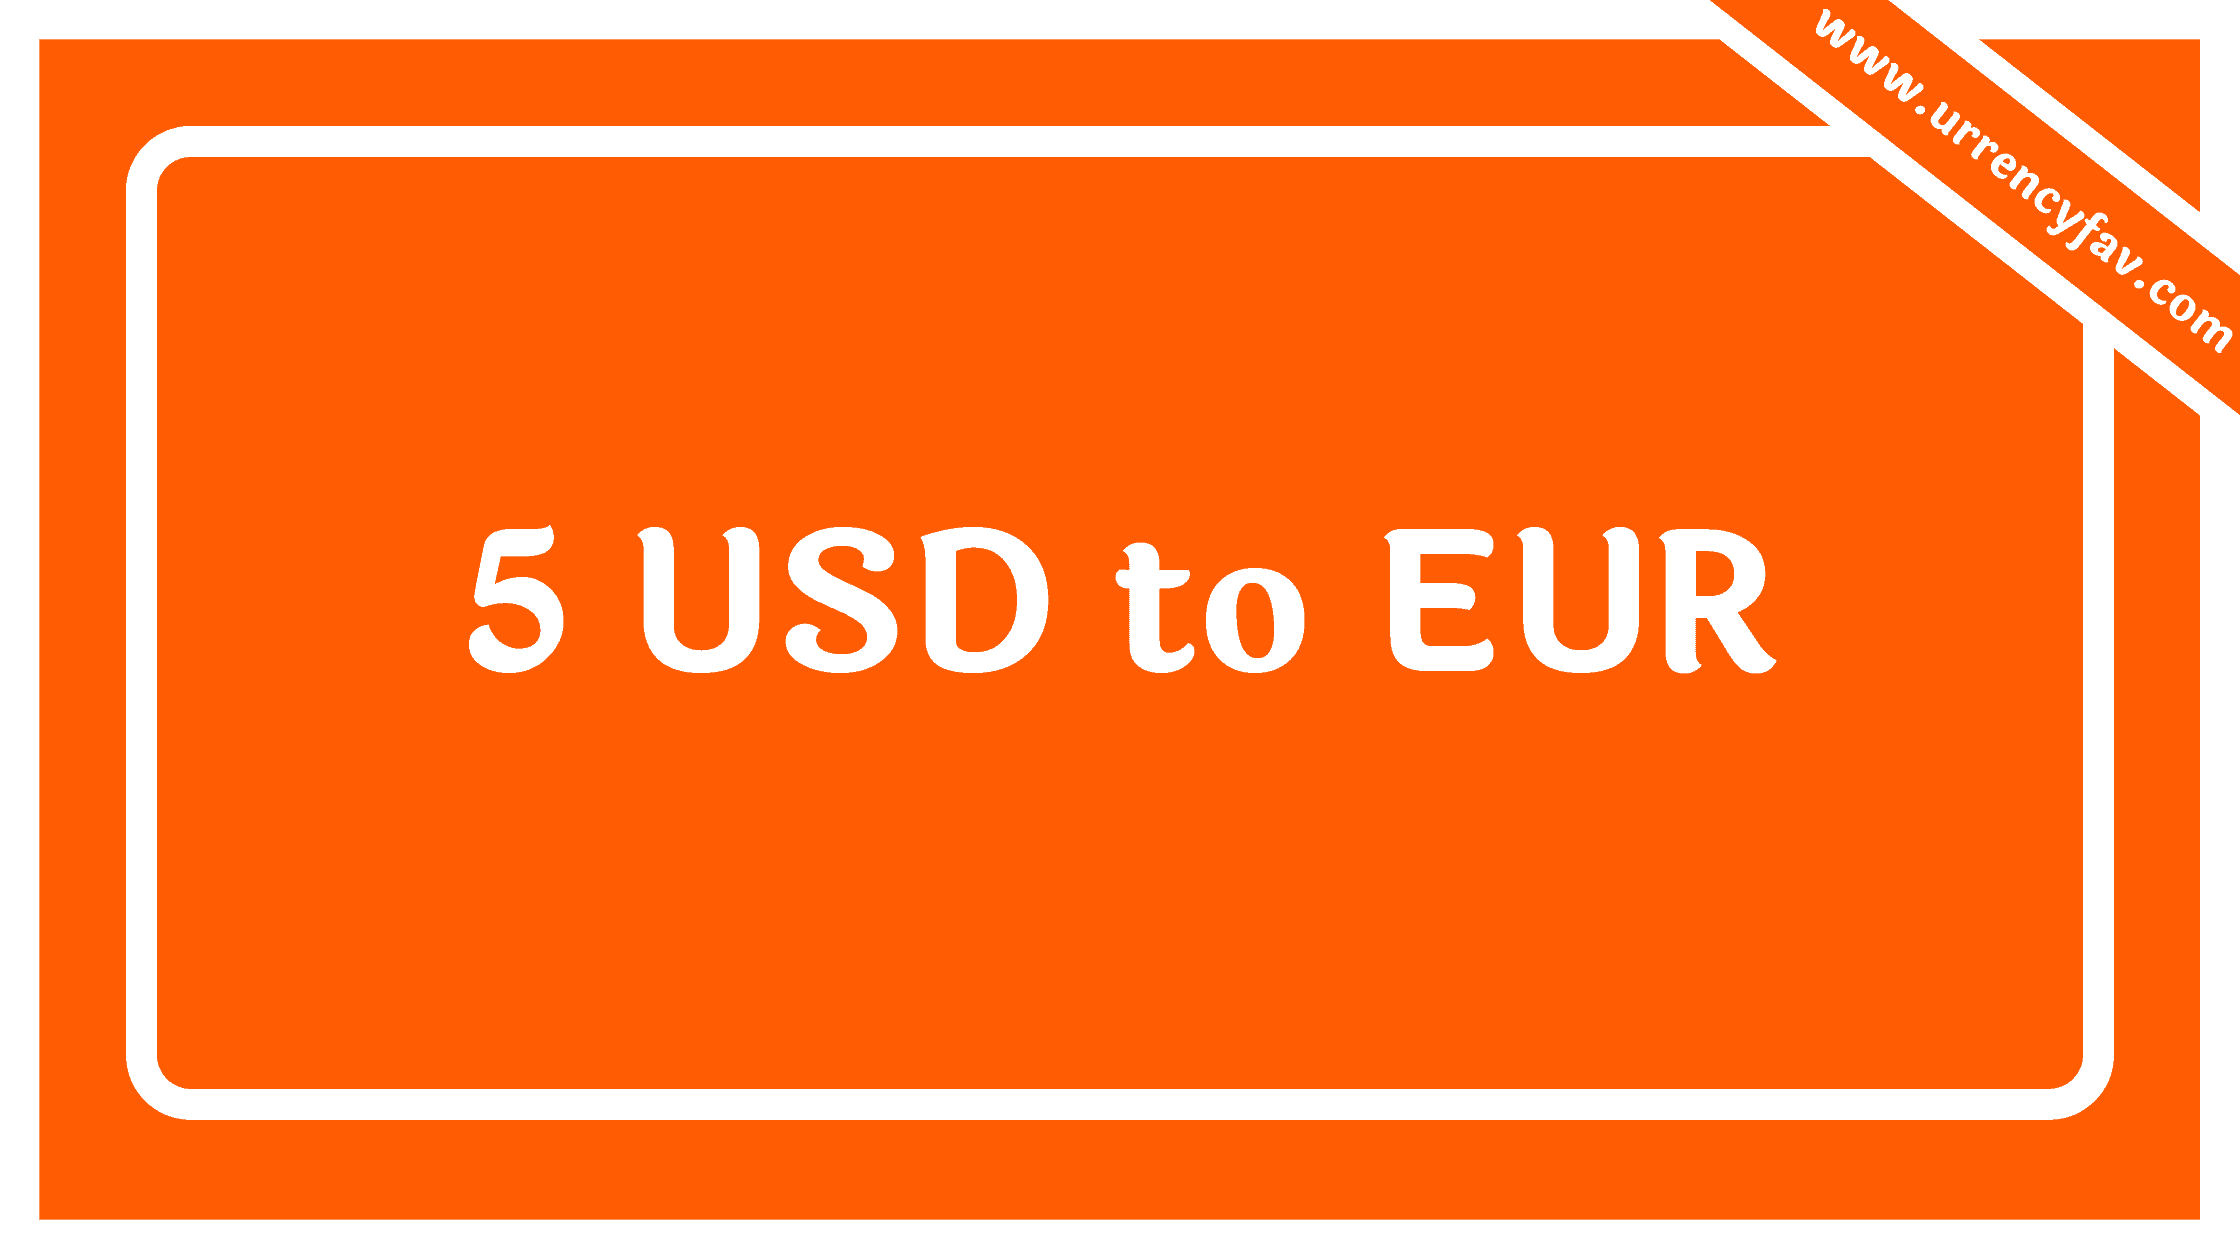 5 USD to EUR